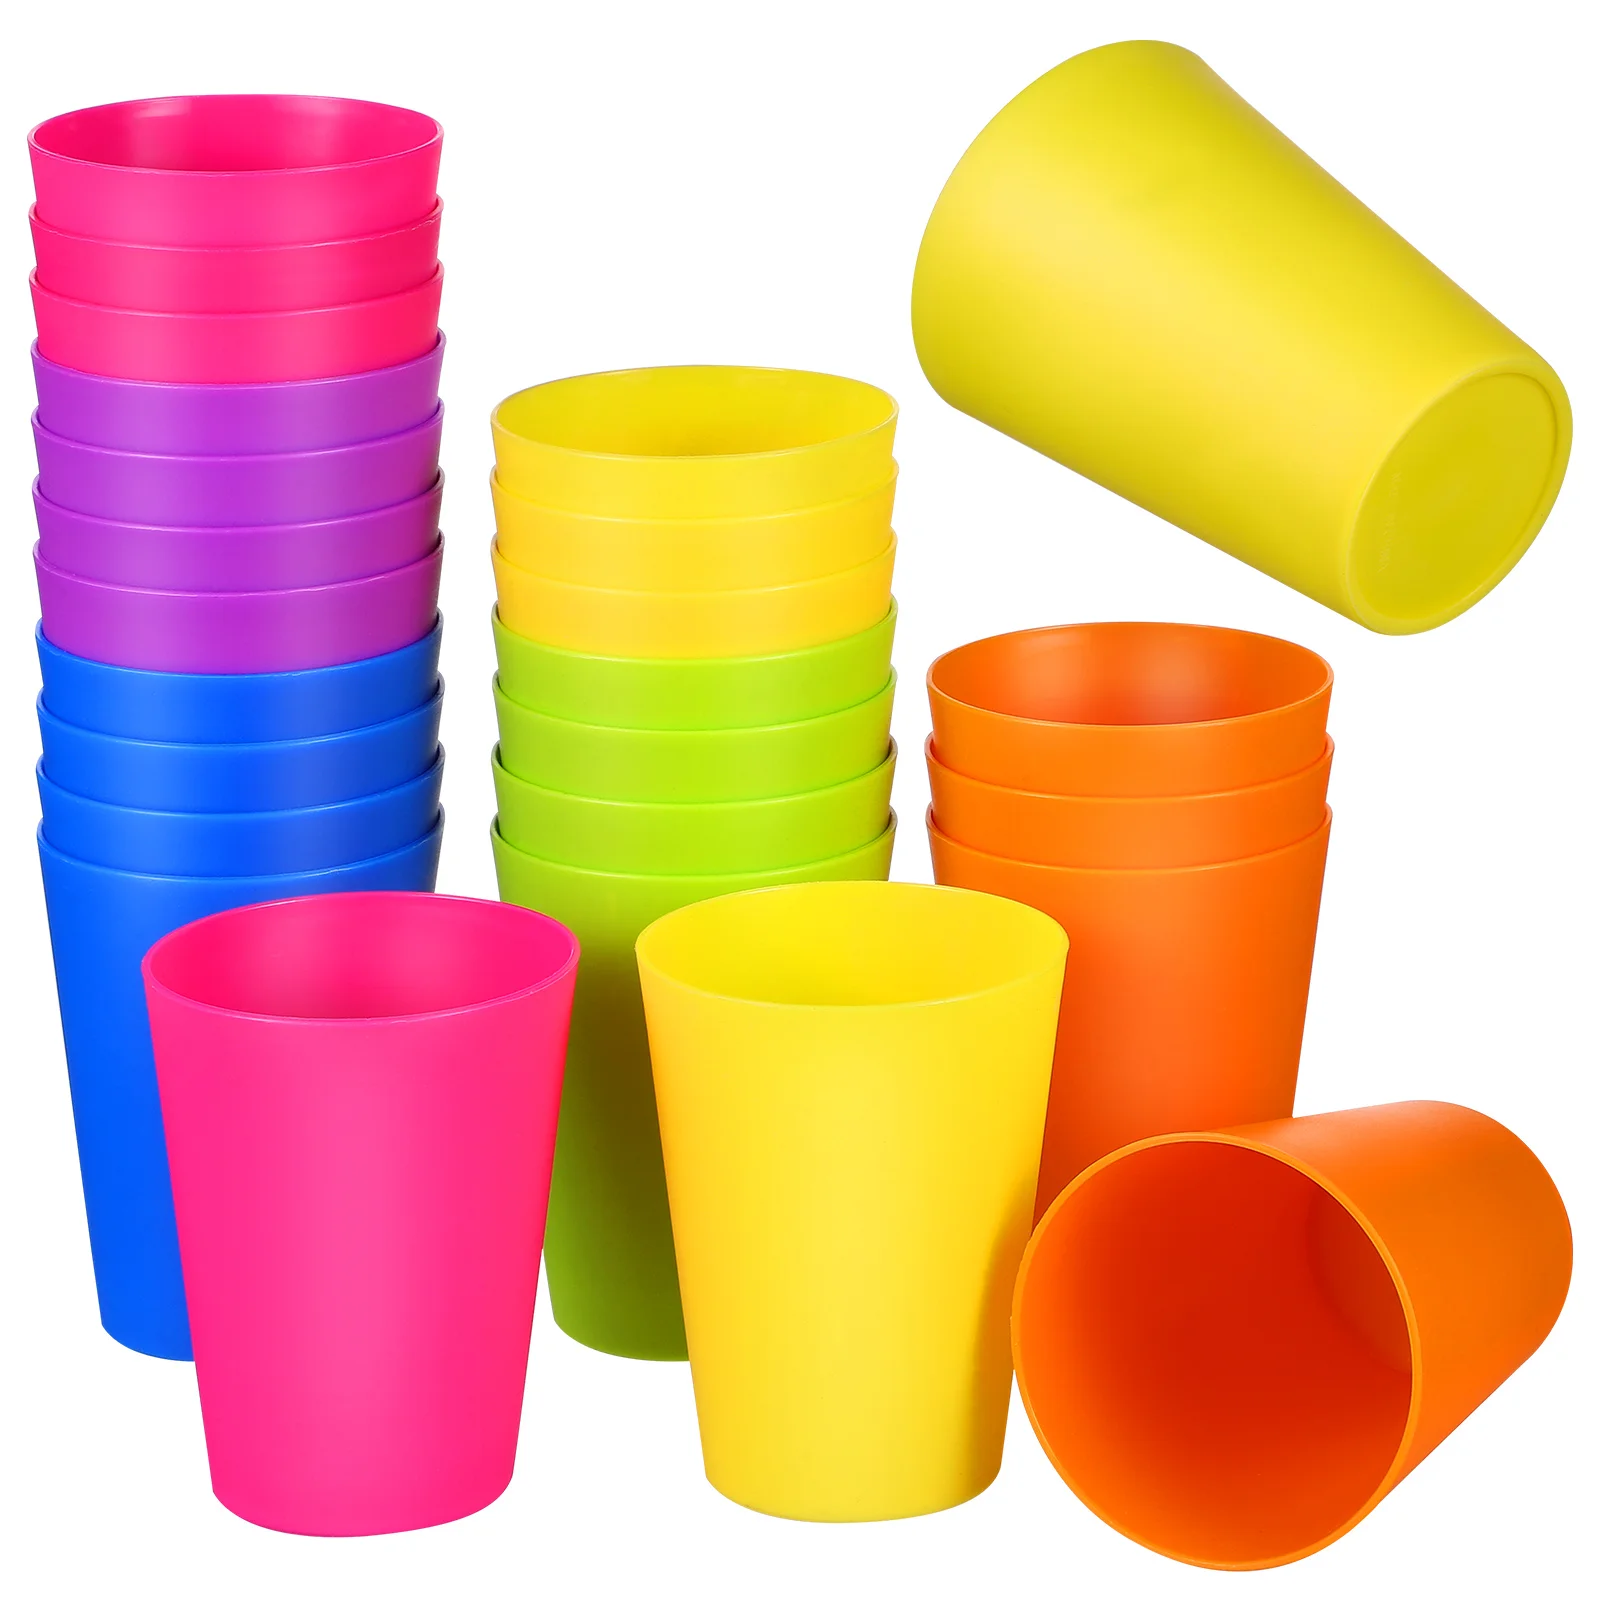 

Cups Plastic Drinking Reusable Cup Party Tumblers Kitchen Unbreakable Water Kids Tumbler Stackable Colorful Oz Disposable